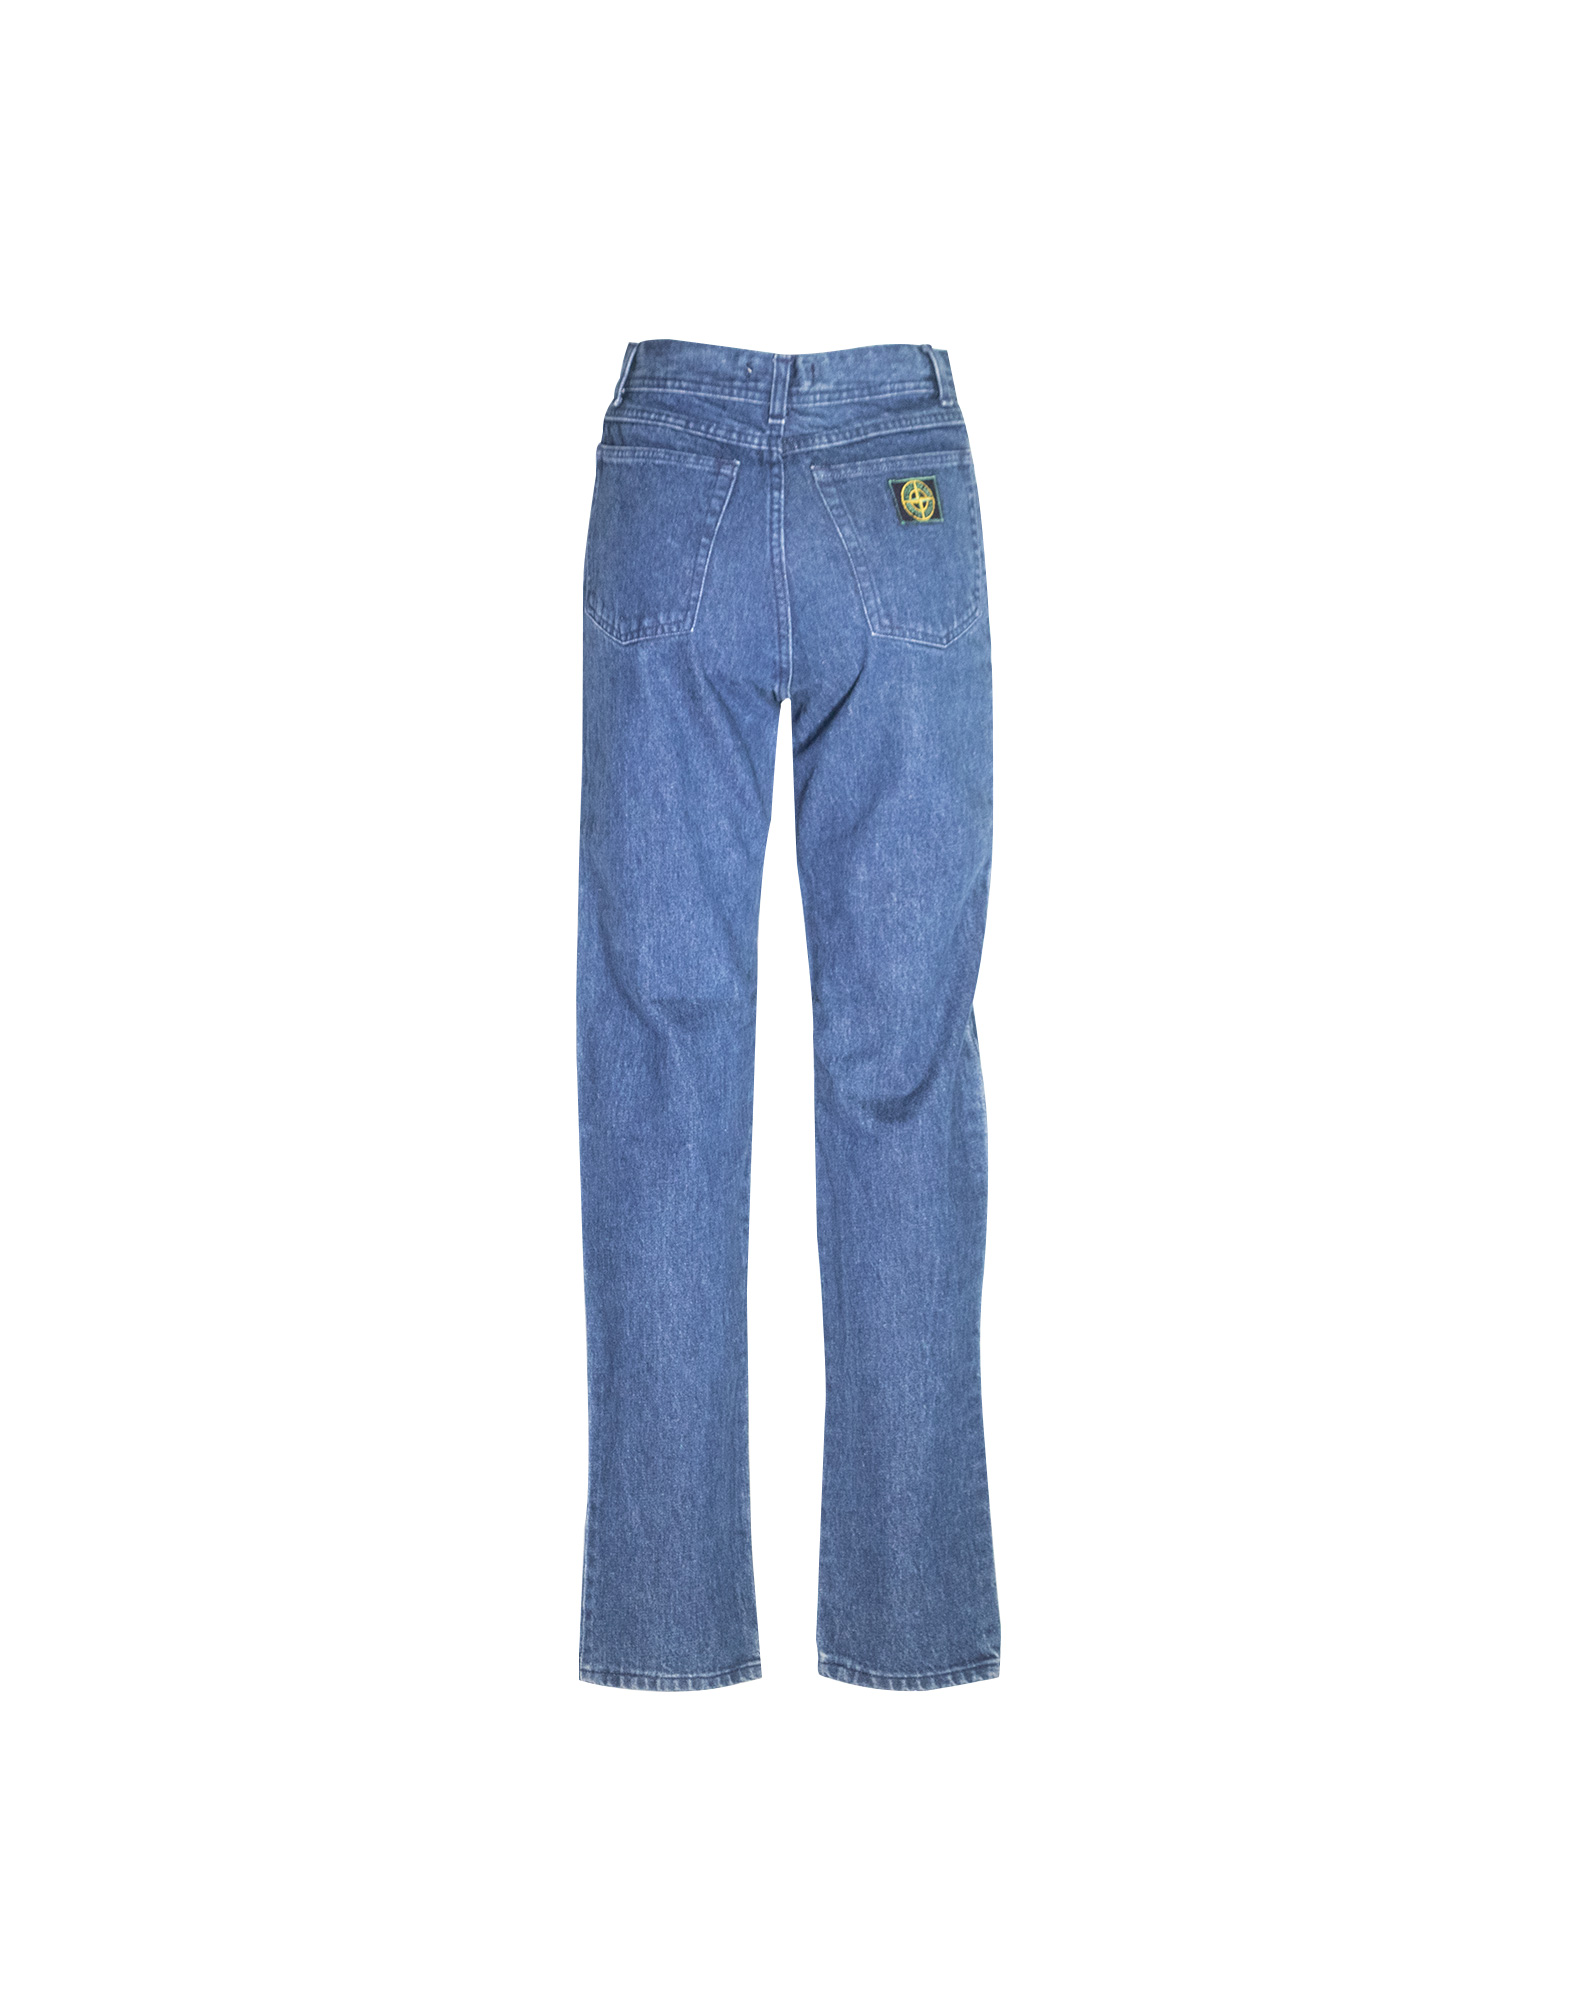 Stone Island - Woman trousers in 100% cotton